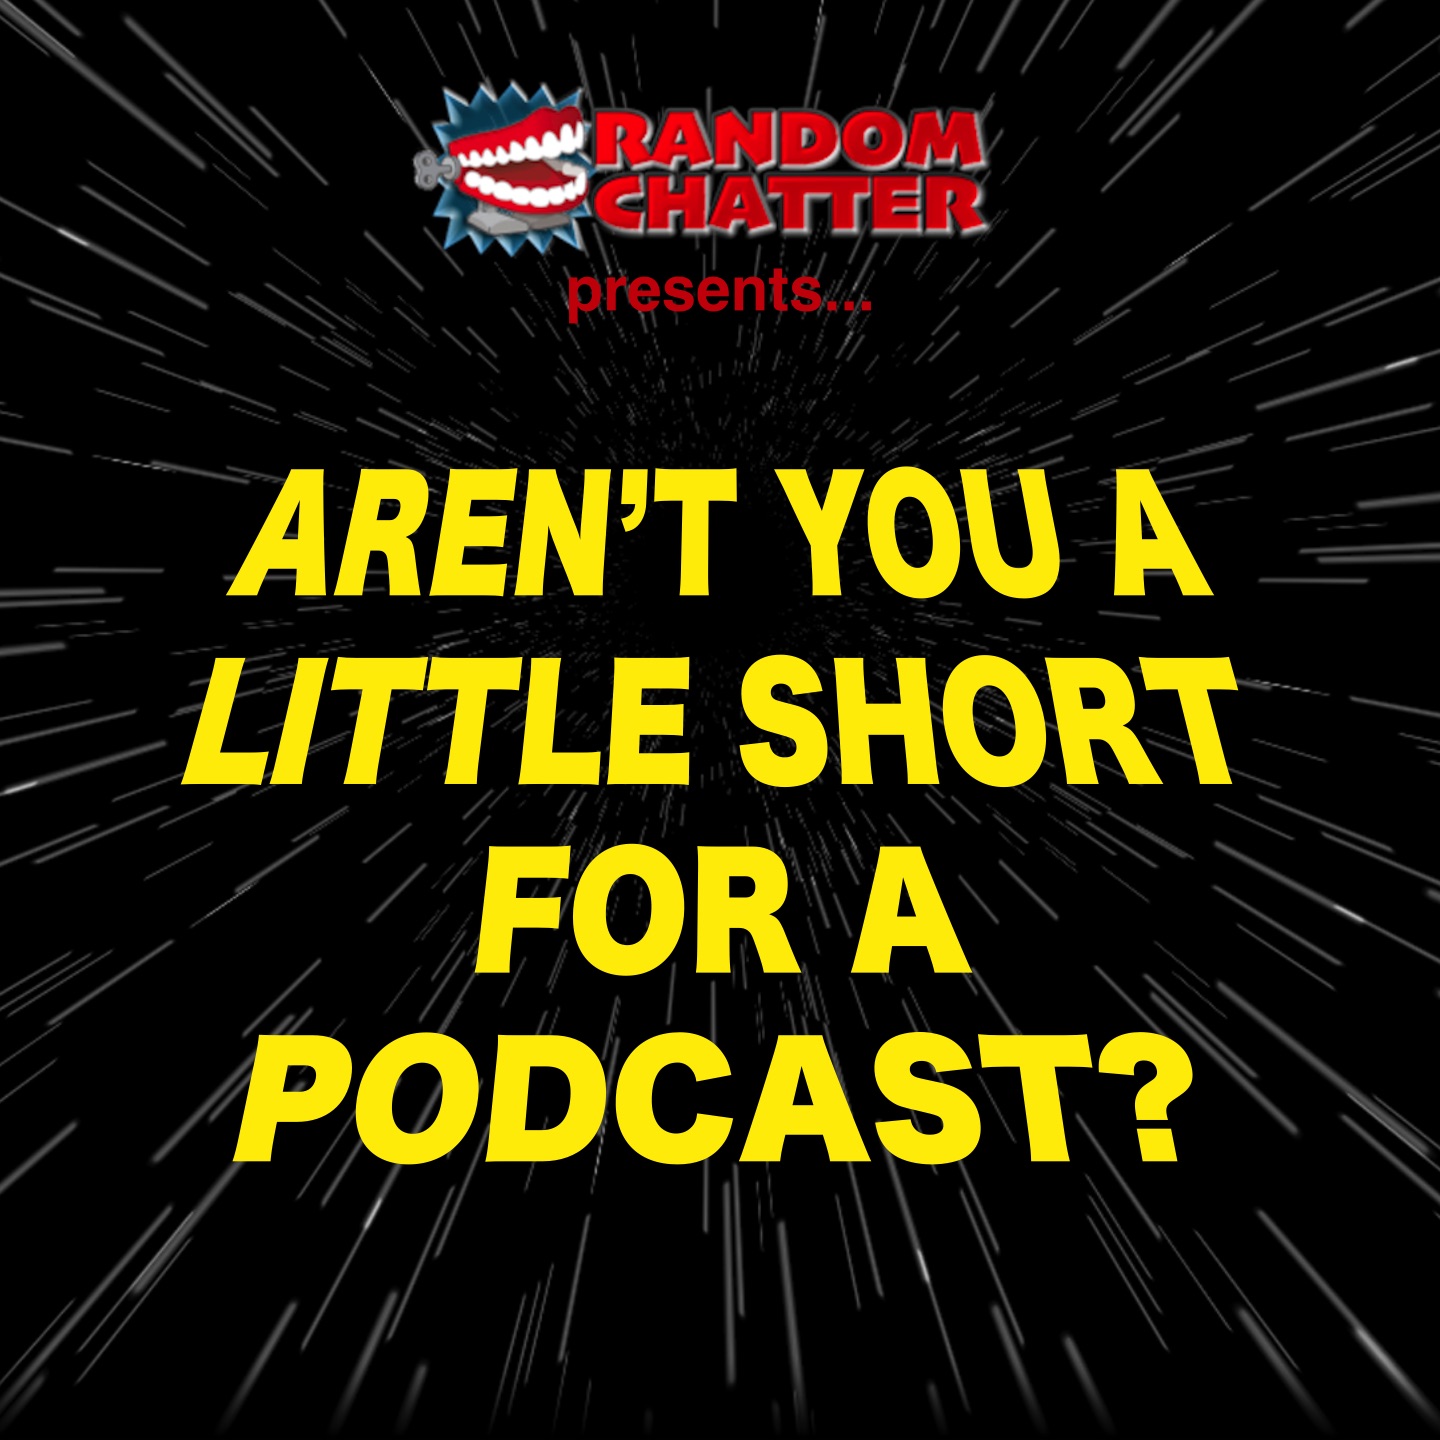 Aren't You a Little Short for a Podcast?